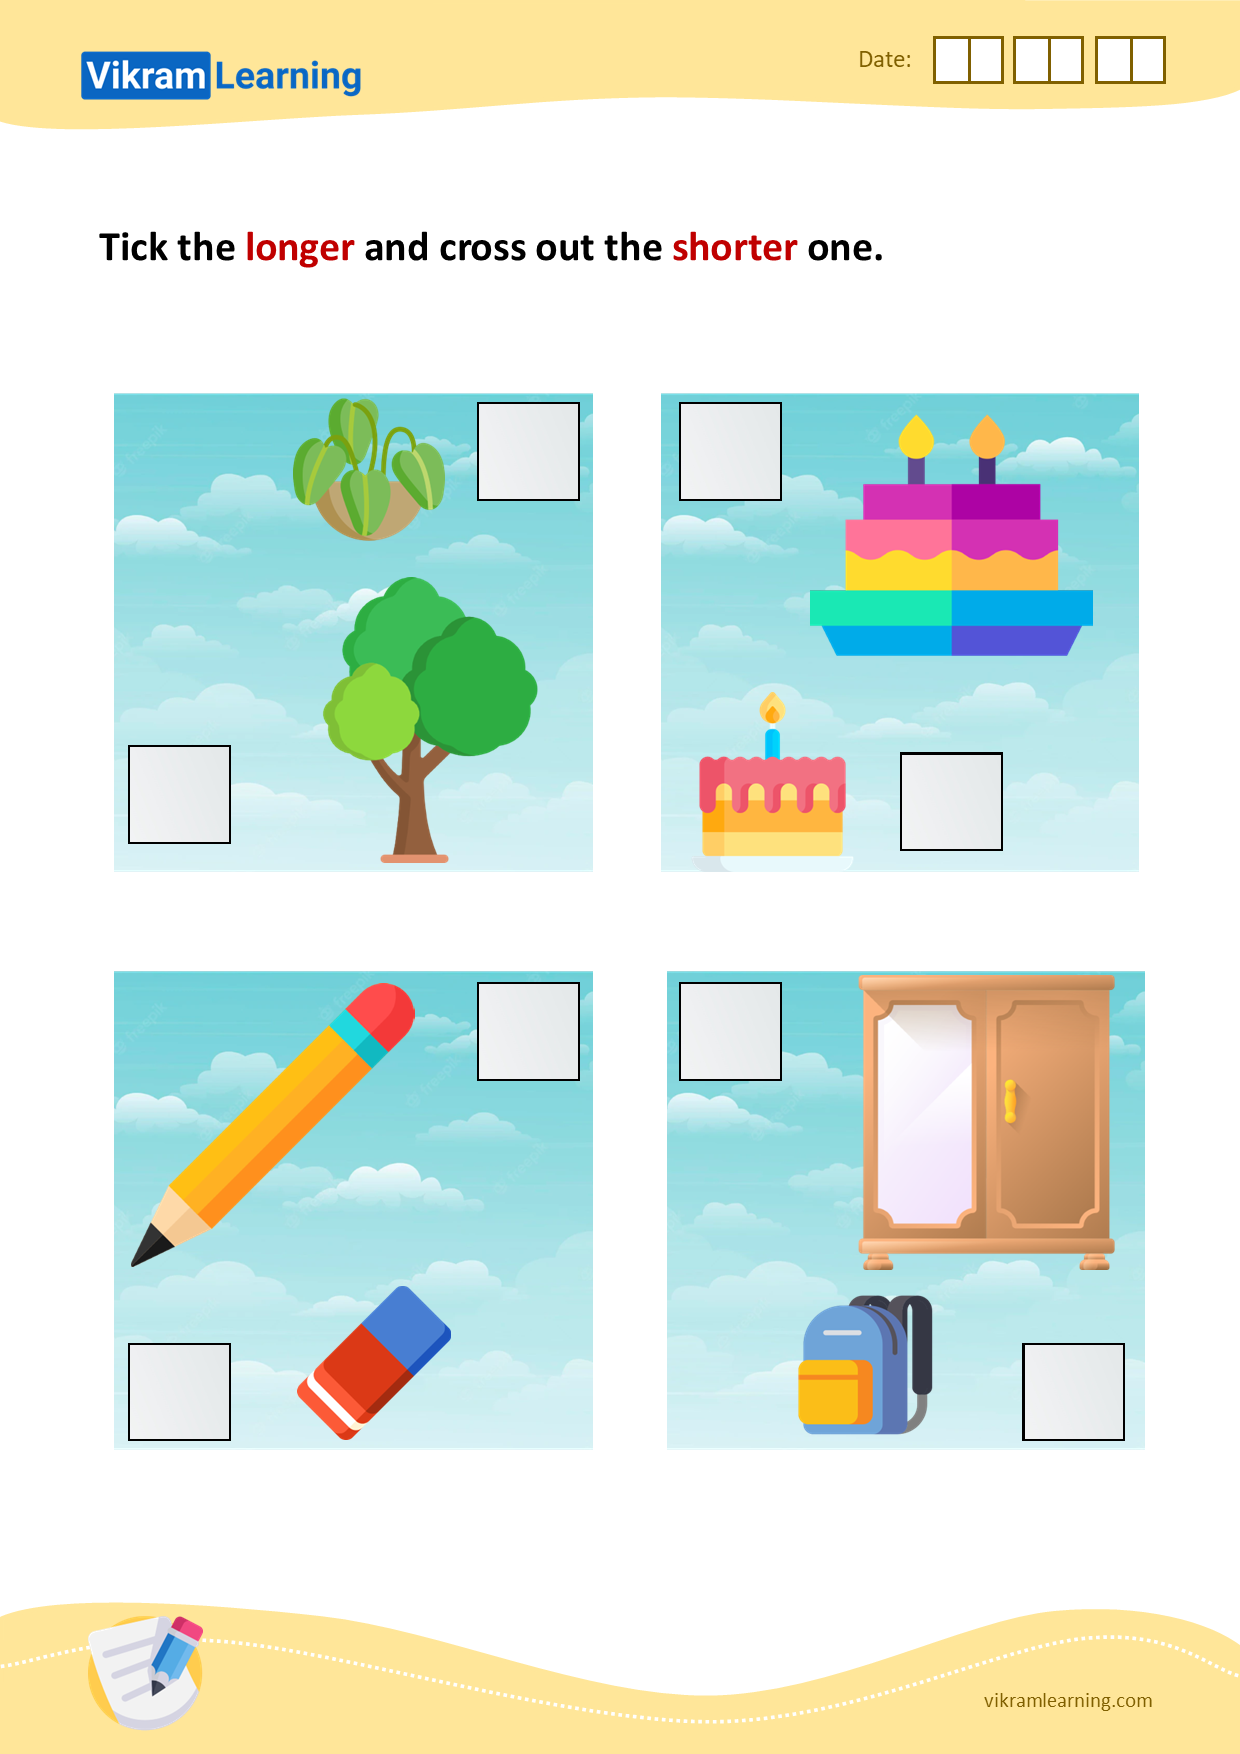 Download tick the longer and cross out the shorter one - 2 worksheets